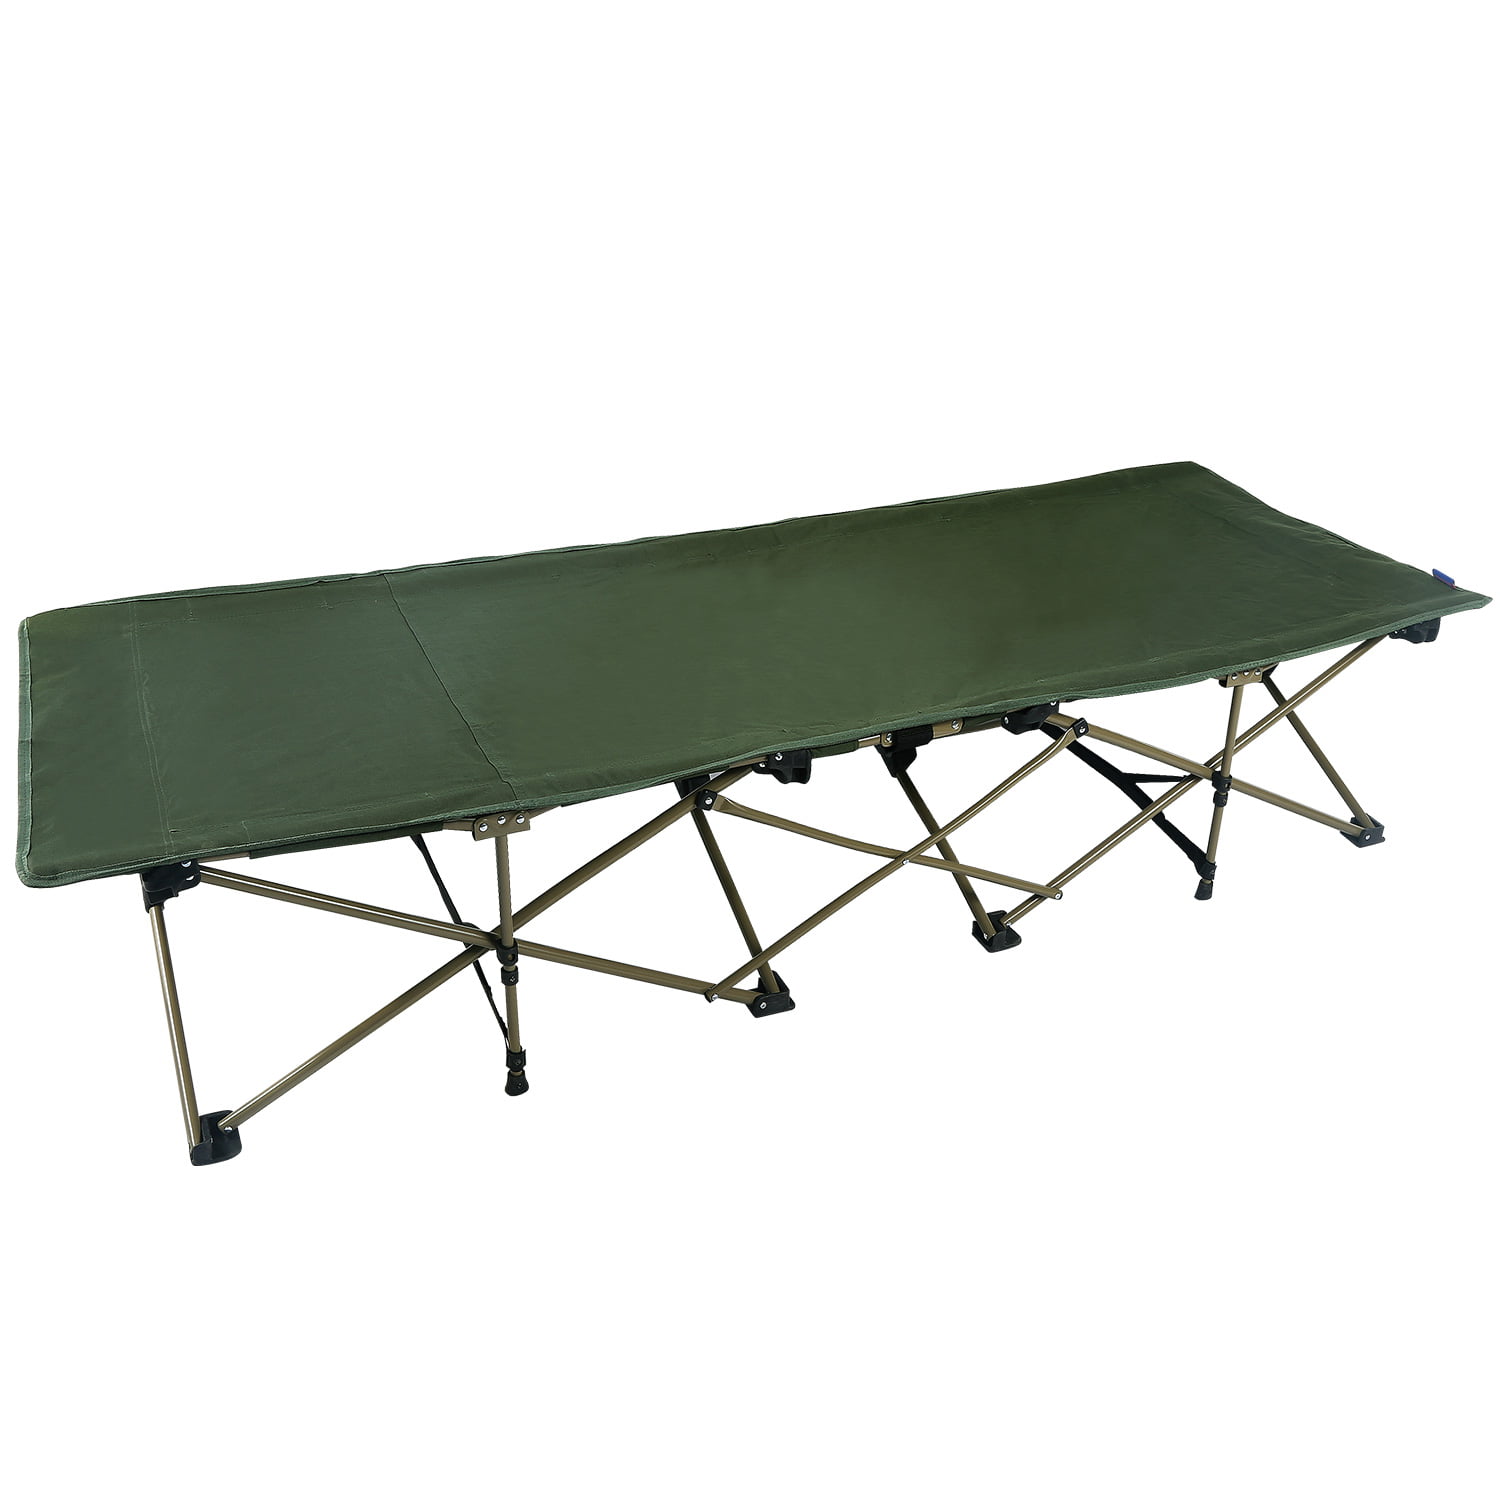 Cot with Pillow/XL Cot/Blue，Army Green Heavy Duty Portable Sleeping Cot Bed with Storage Bag REDCAMP Folding Camping Cot for Adults 